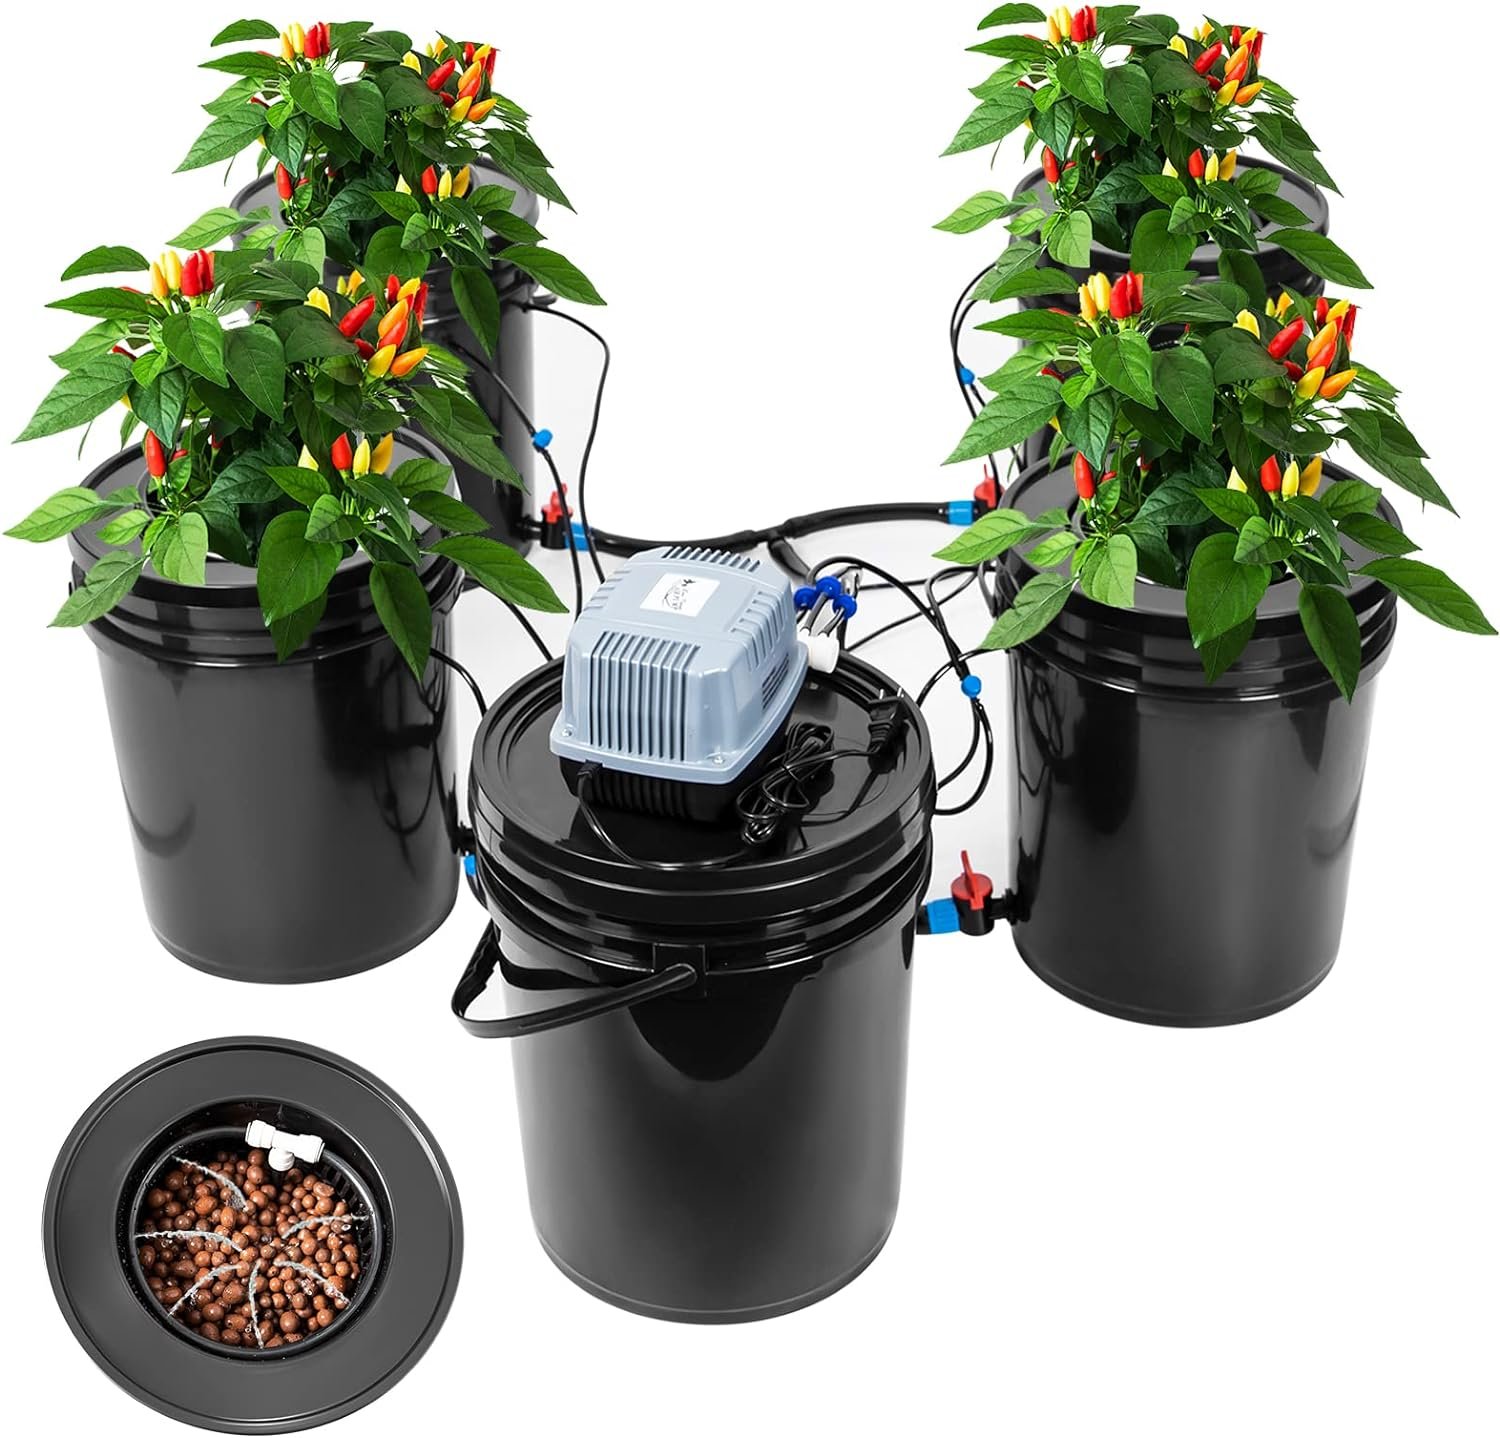 hydroponics growing system review